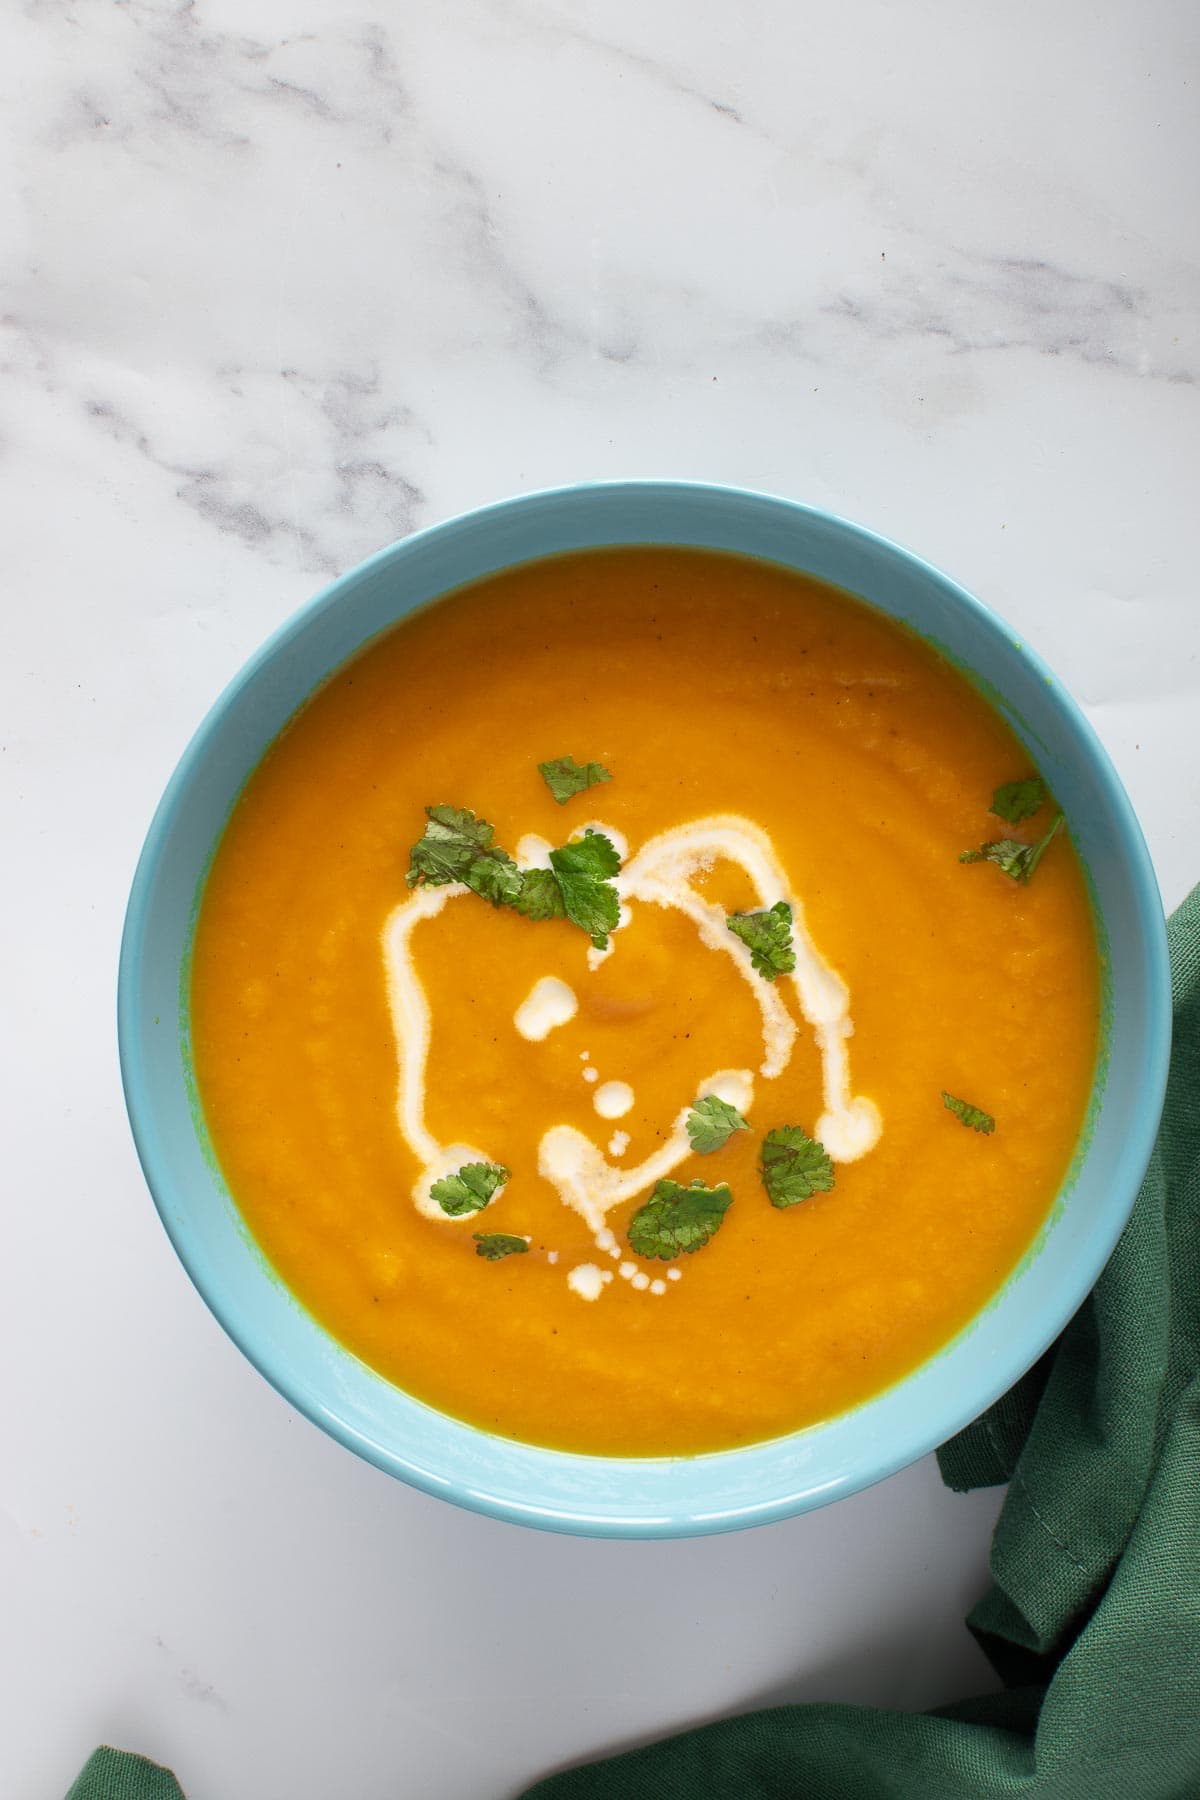 A bowl of carrot and ginger soup on a table.